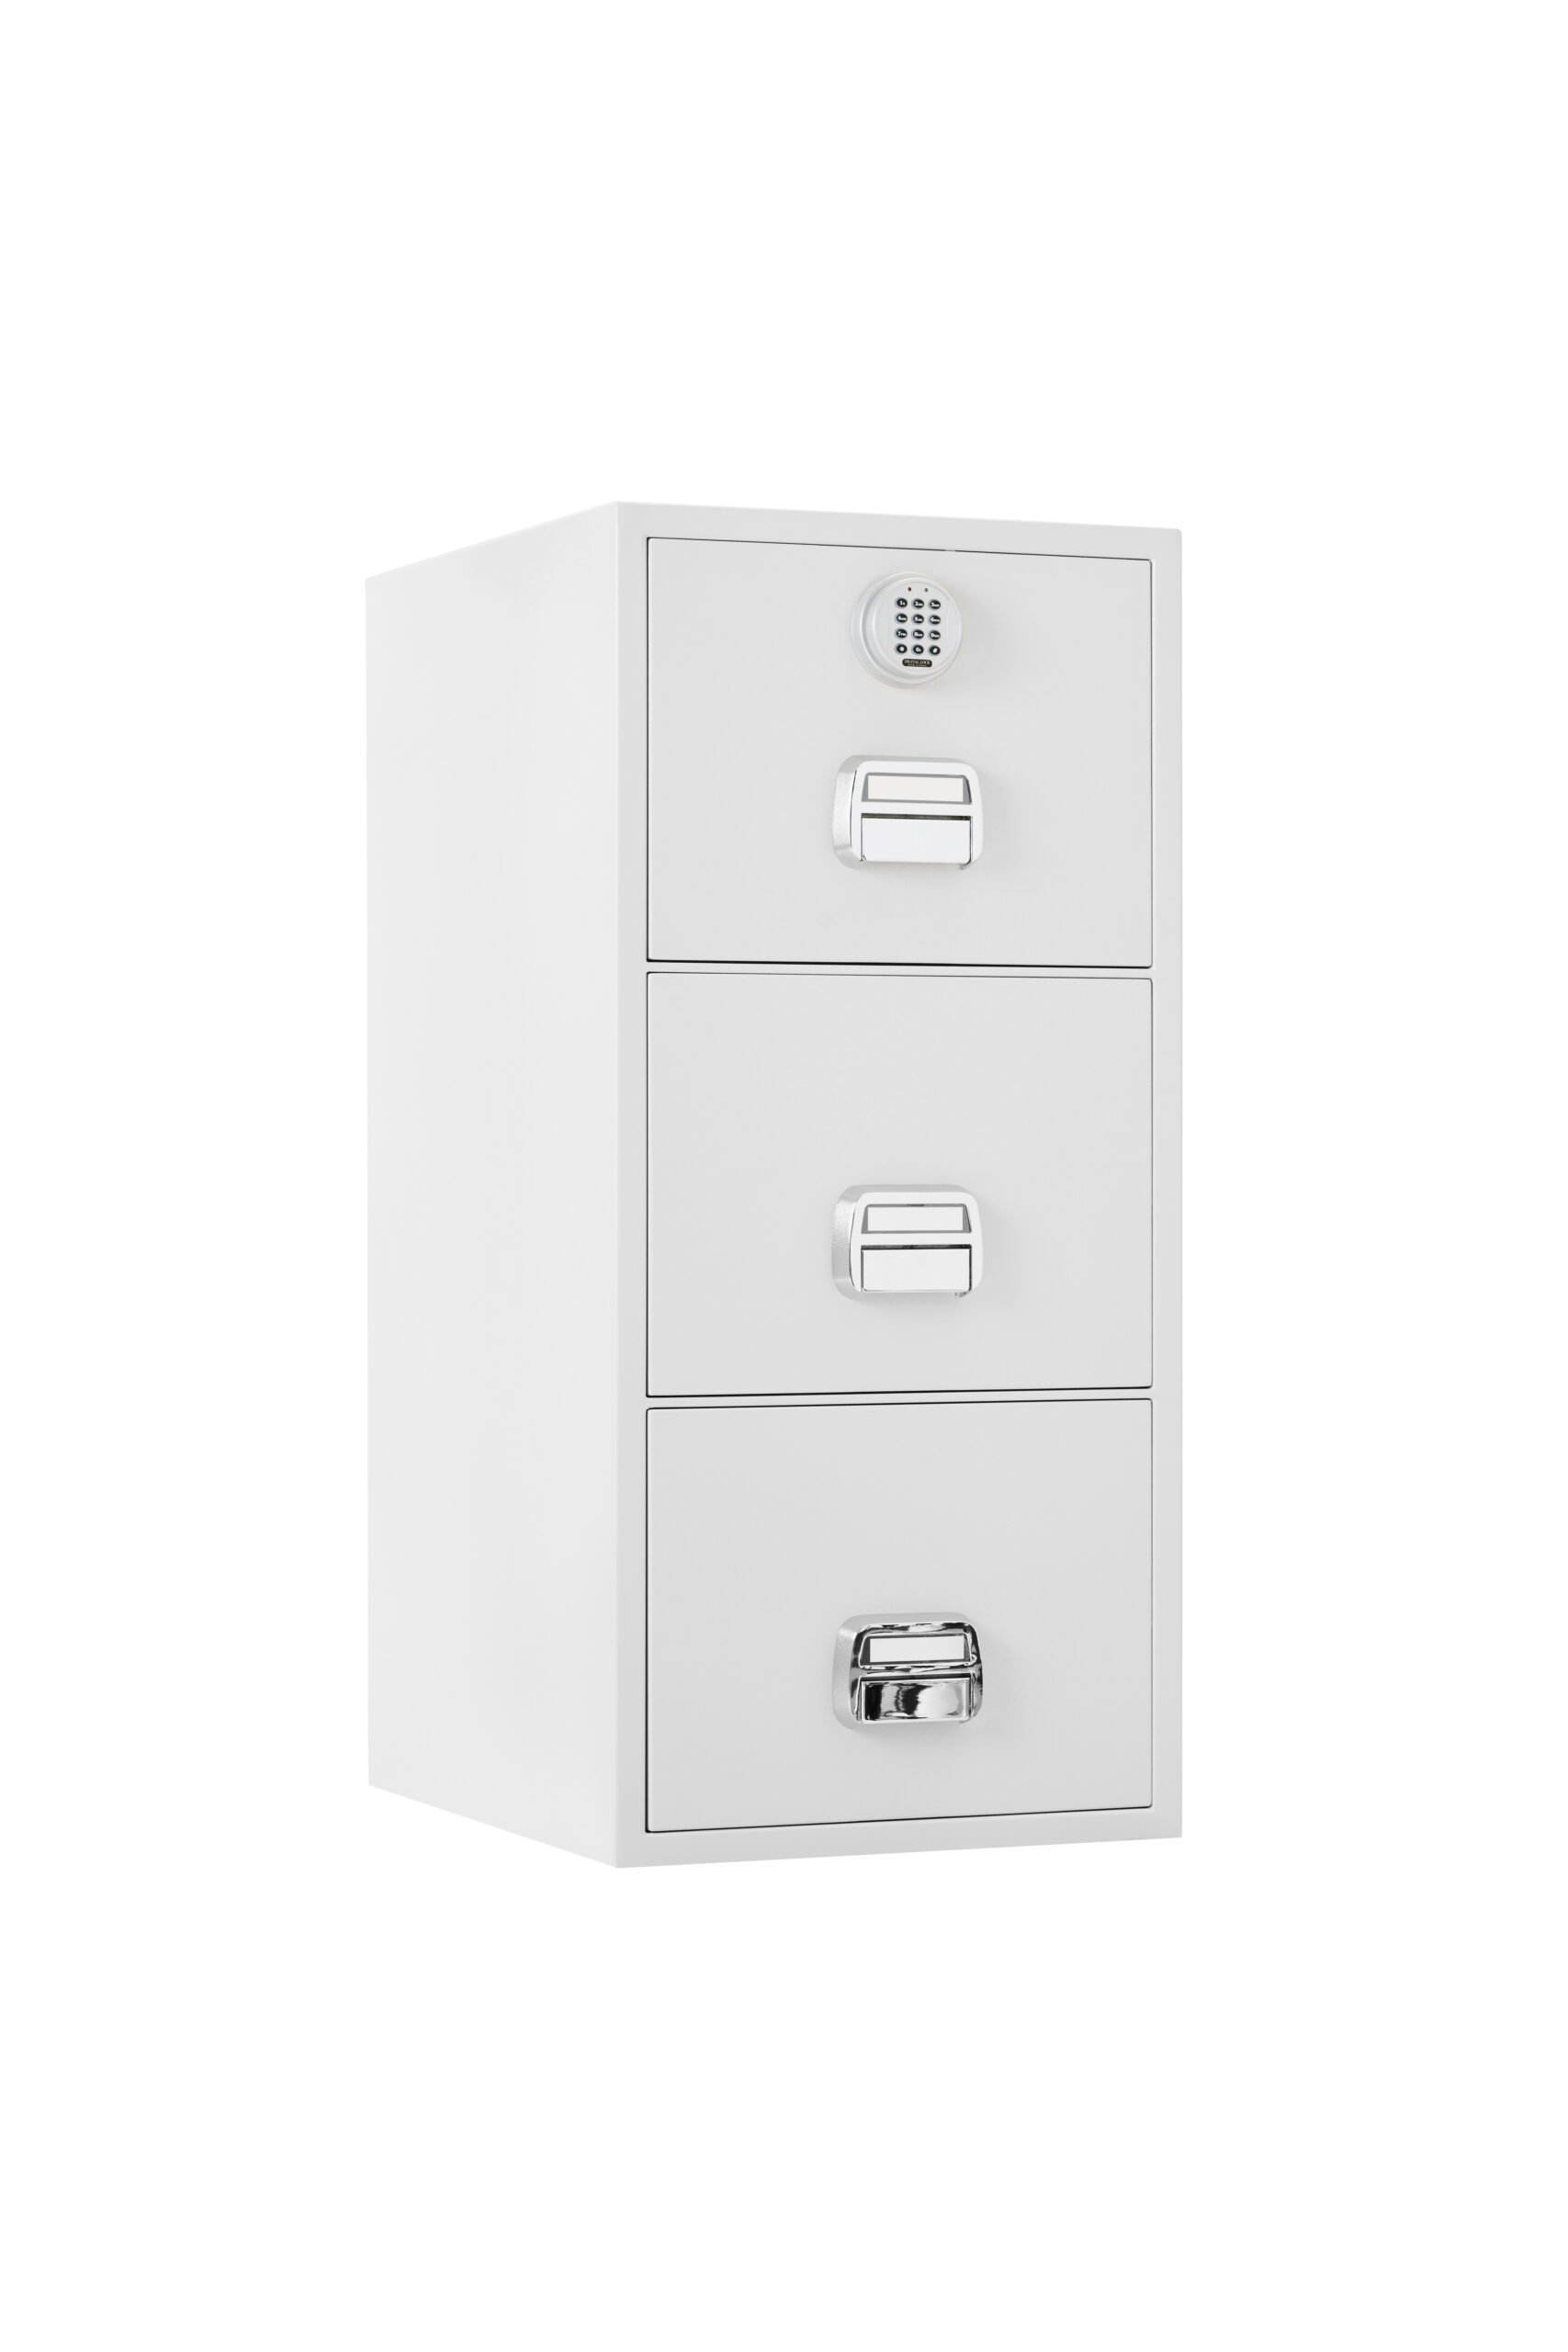 The De Raat Protector SF-680-3EOX is a 3 drawer fire resistant filing cabinet with 90 minutes protection for paper records. This is a quality office fire filing cabinet that comes with an electronic code lock.